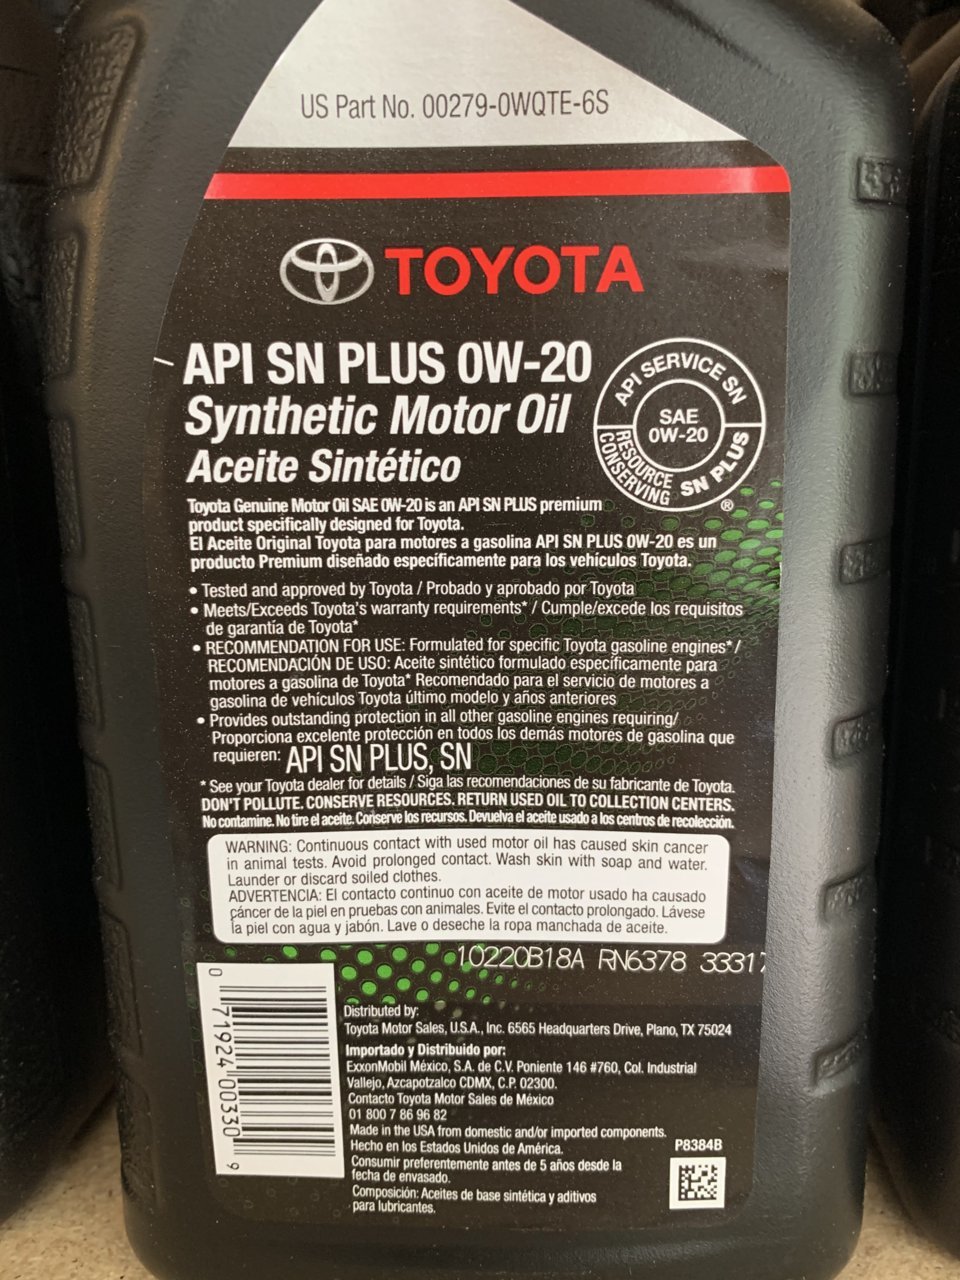 2020 Tundra oil changes | Toyota Tundra Forum